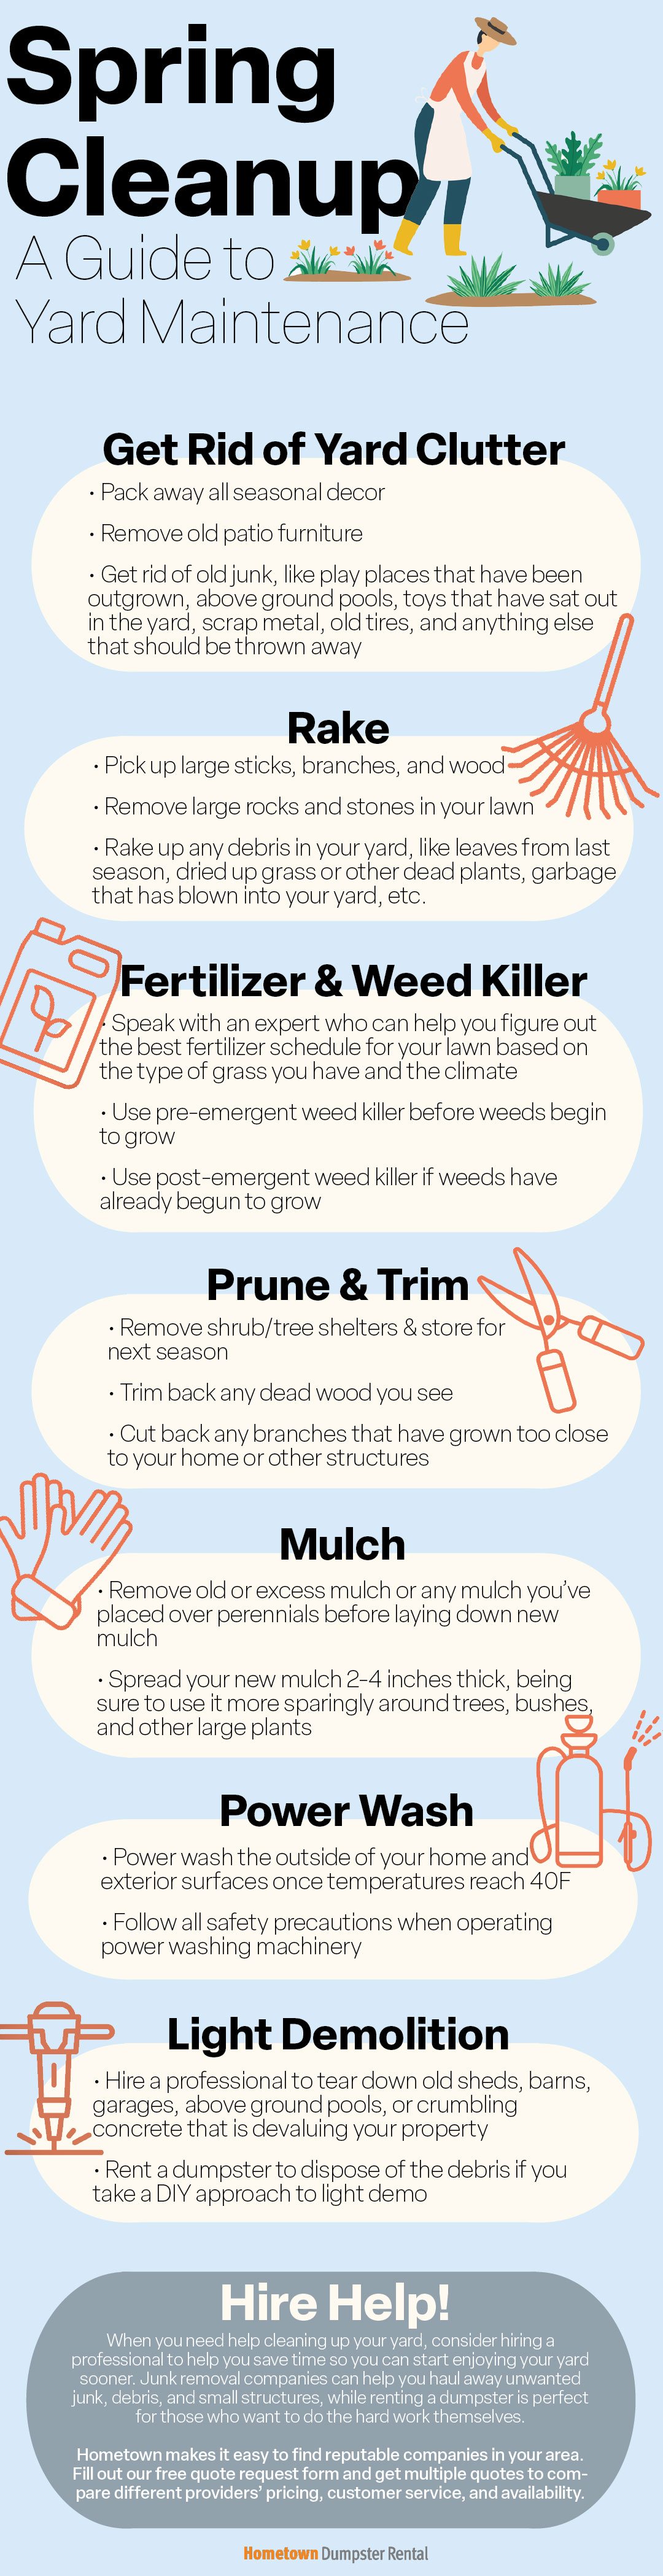 Spring Cleanup: A Guide to Yard Maintenance Infographic